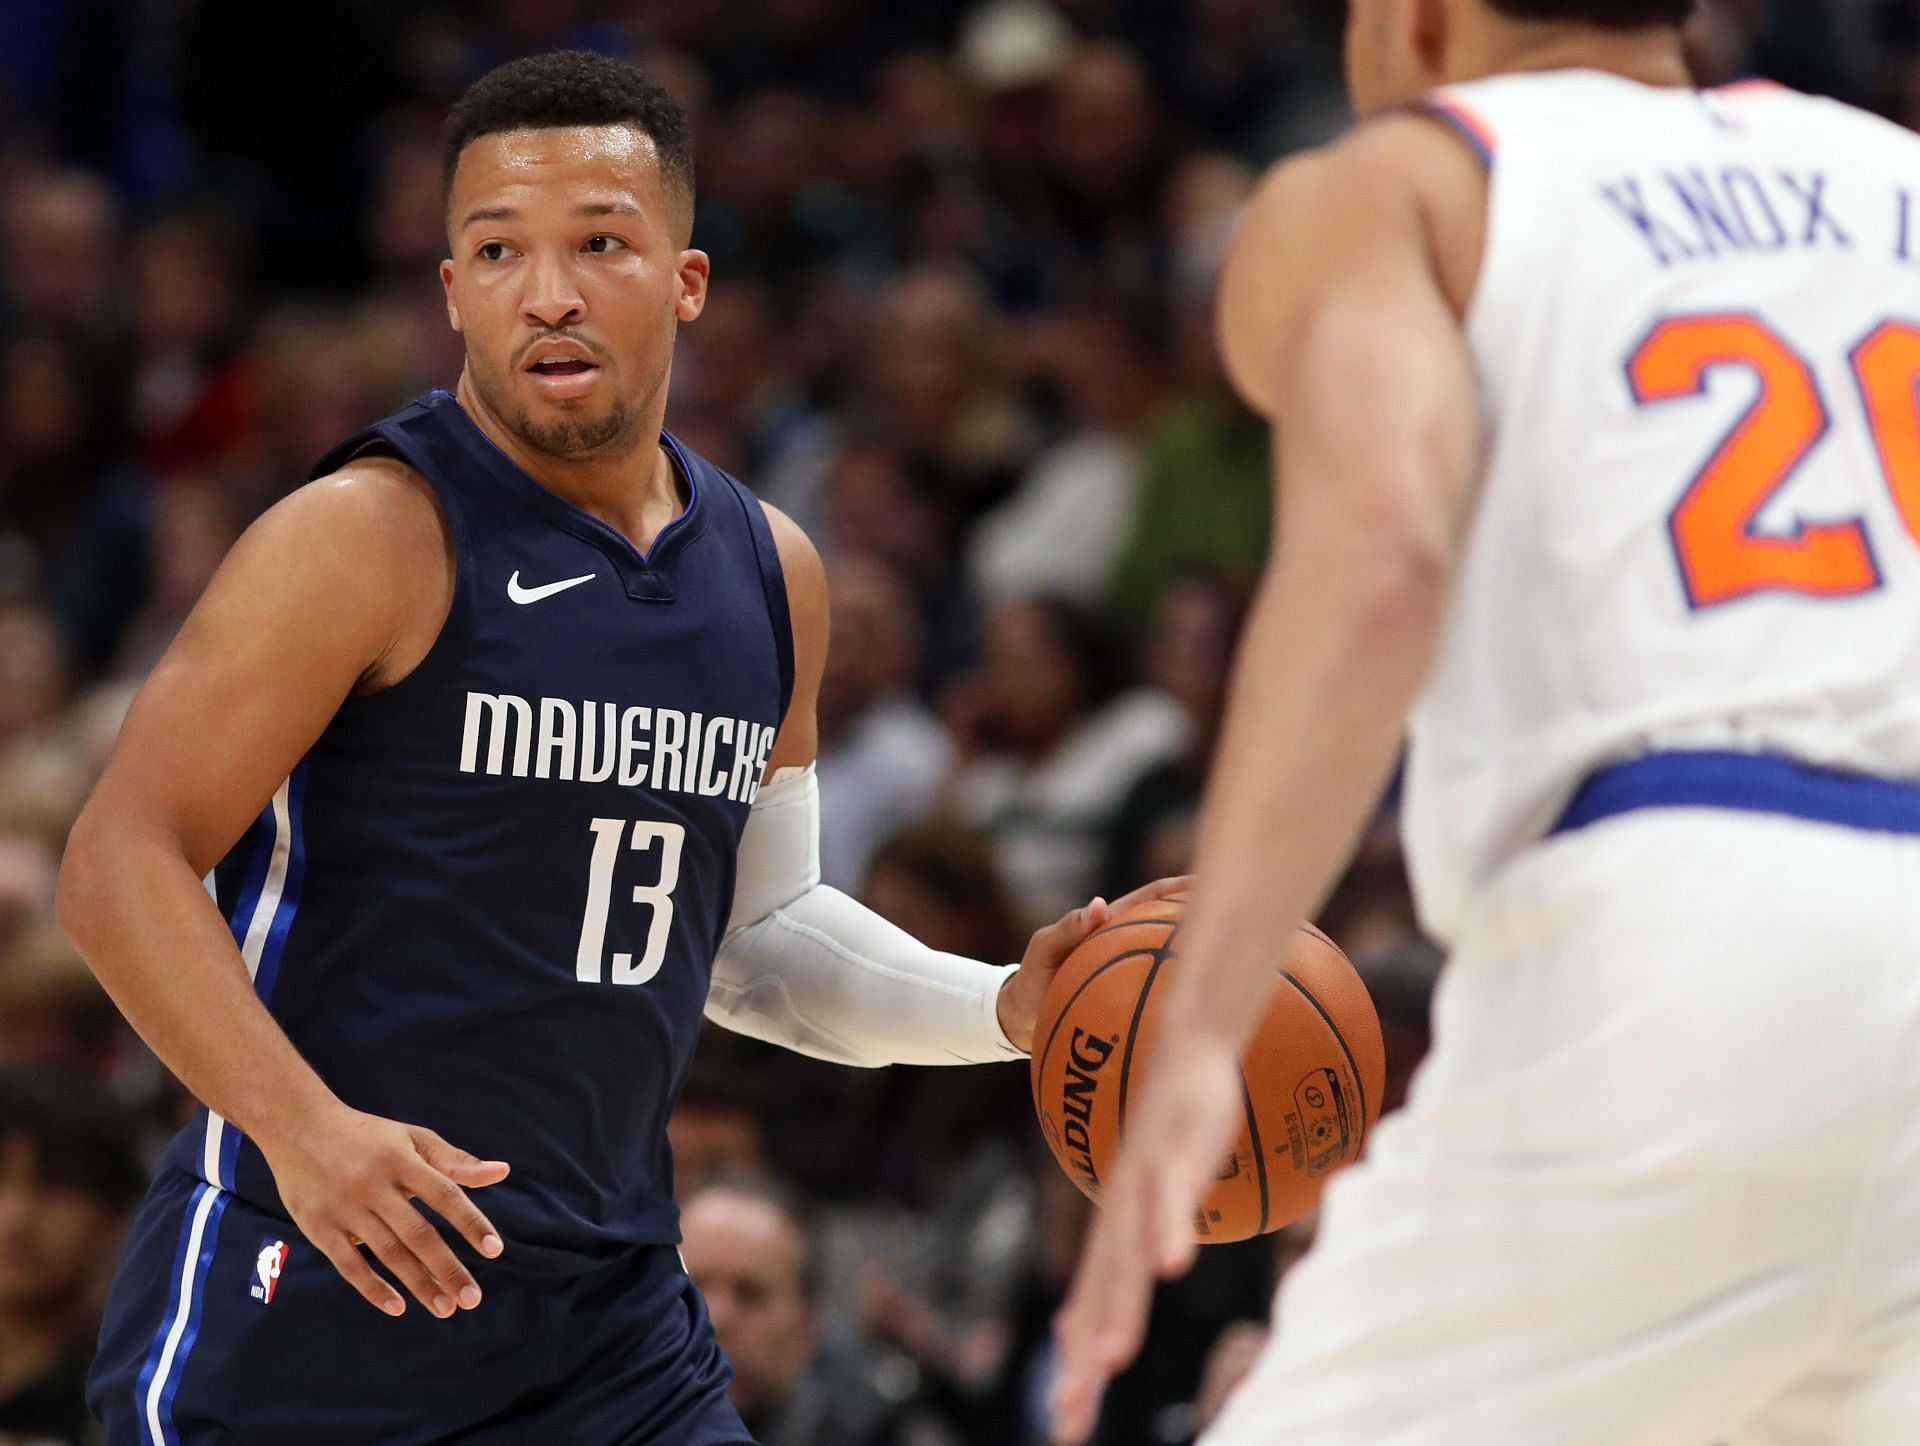 Team USA's Jalen Brunson surprised to know dad Rick played in PBA as import  